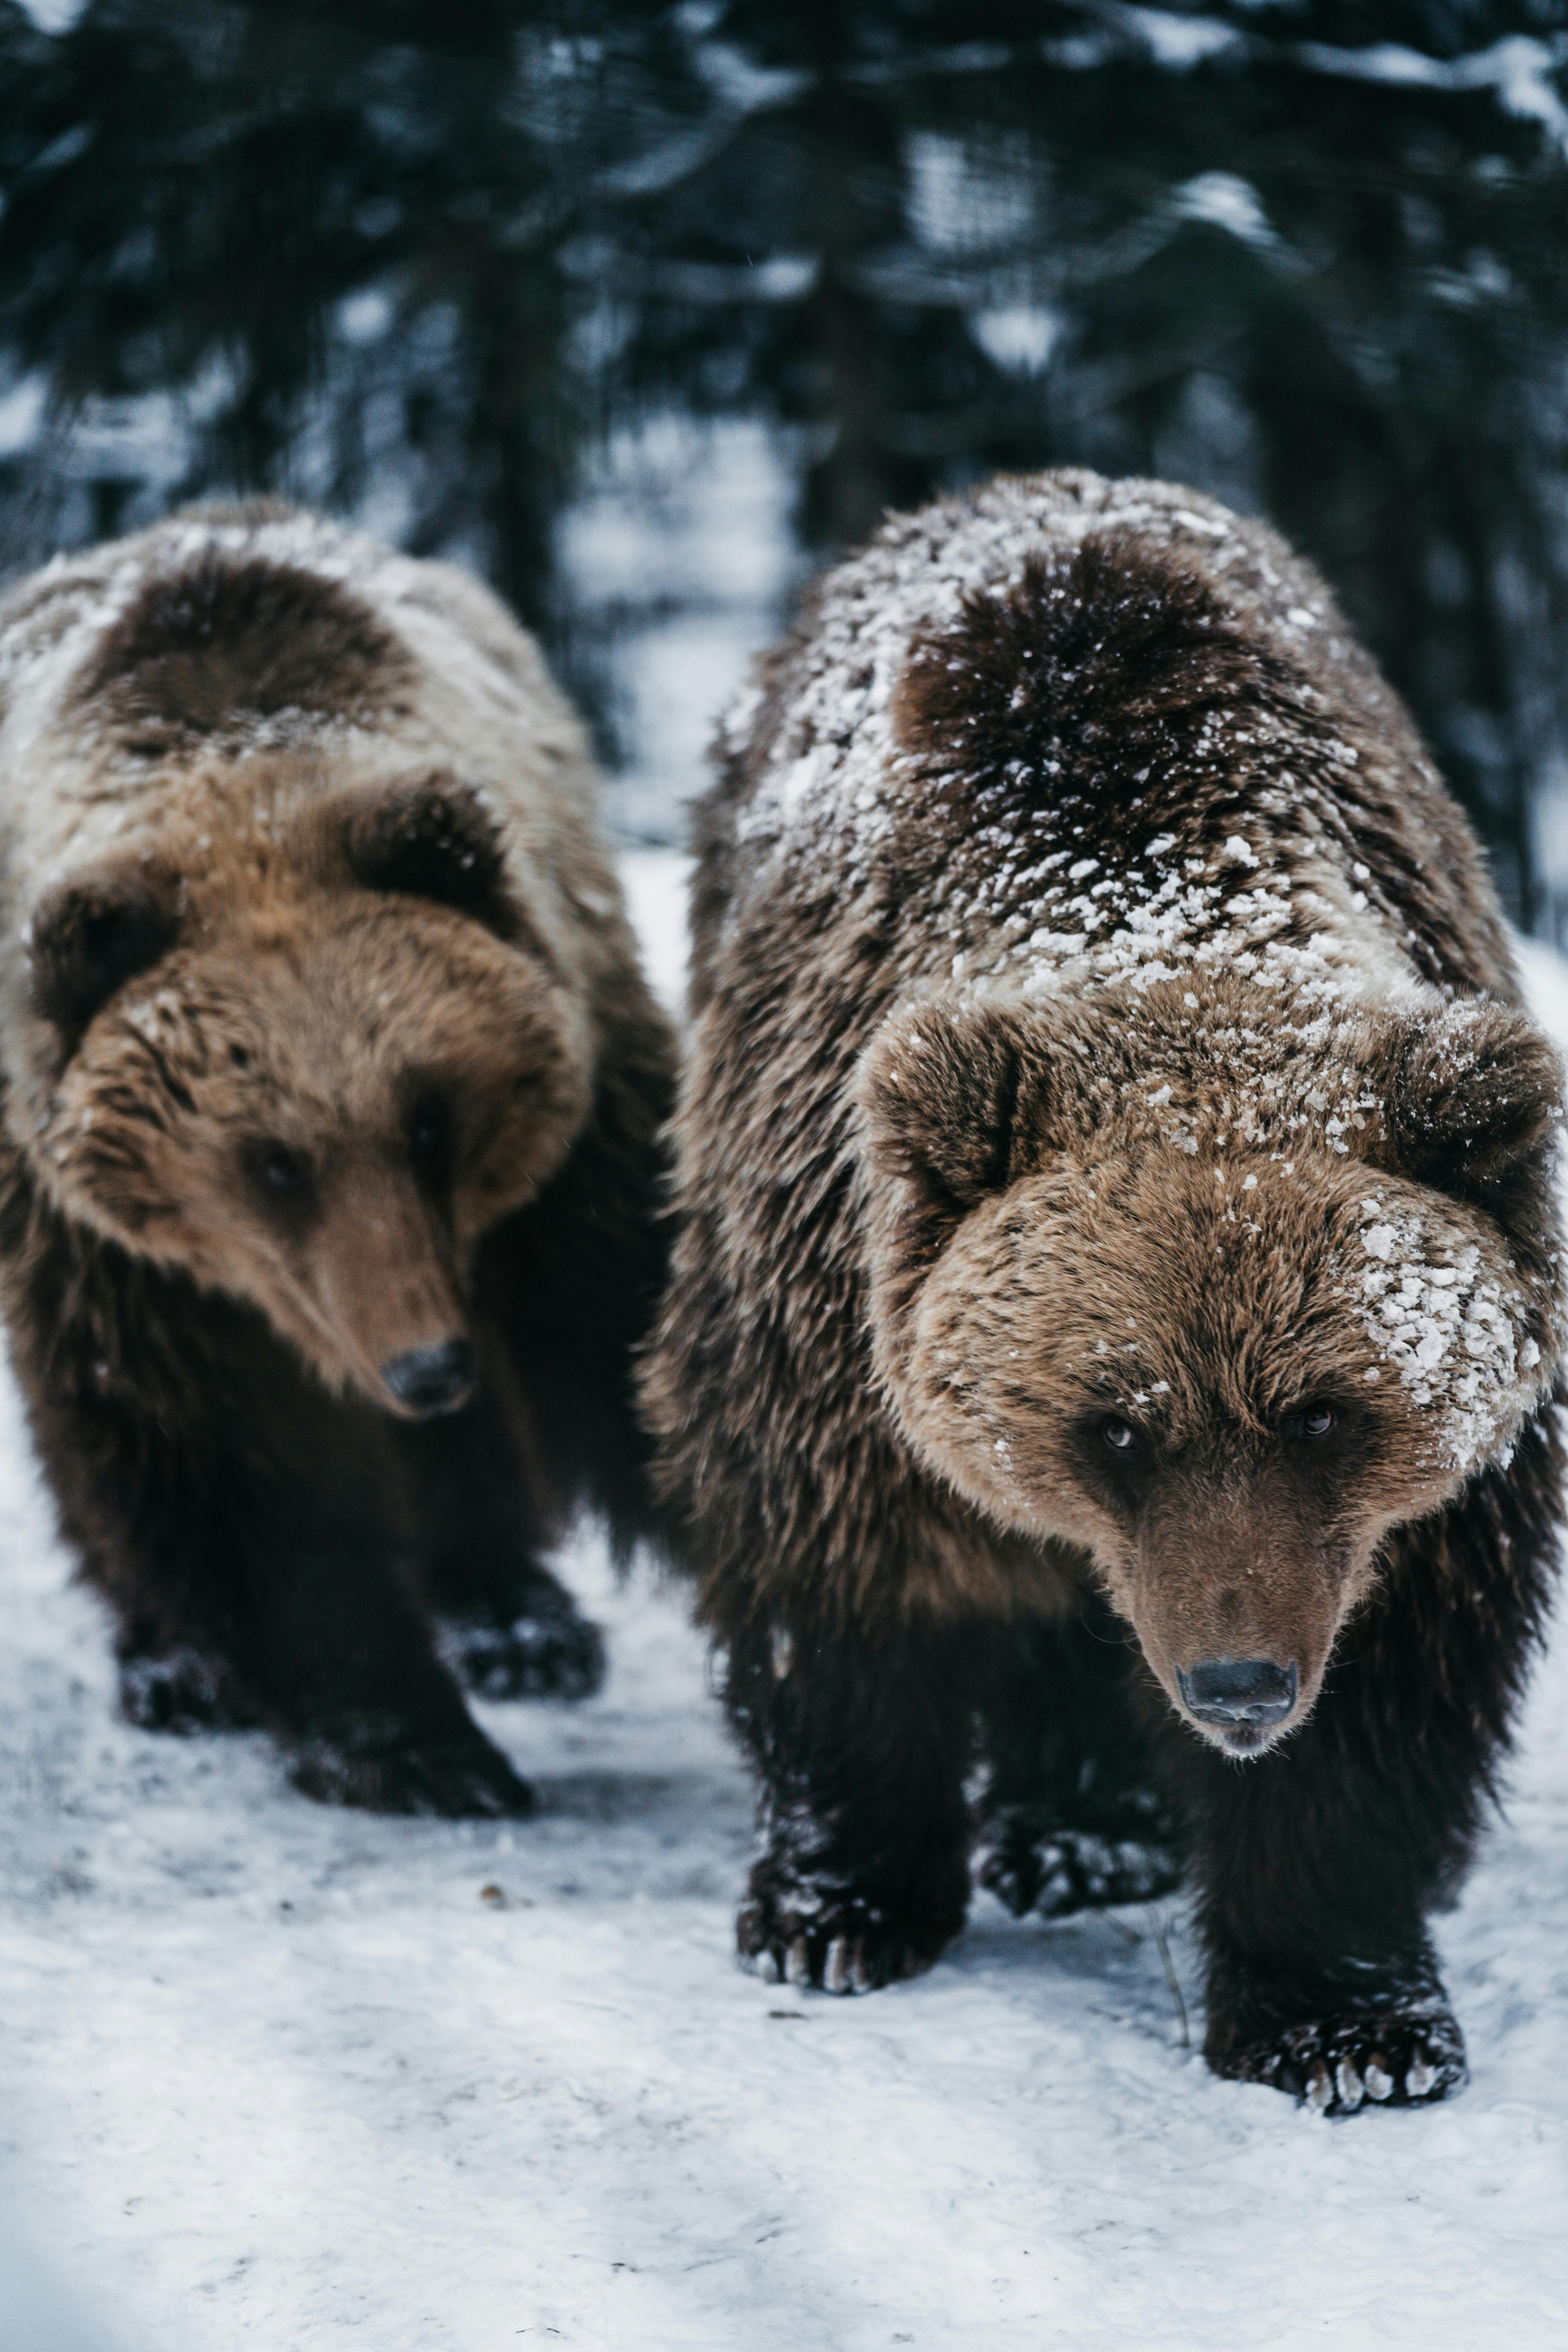 grizzly bears fighting wallpaper